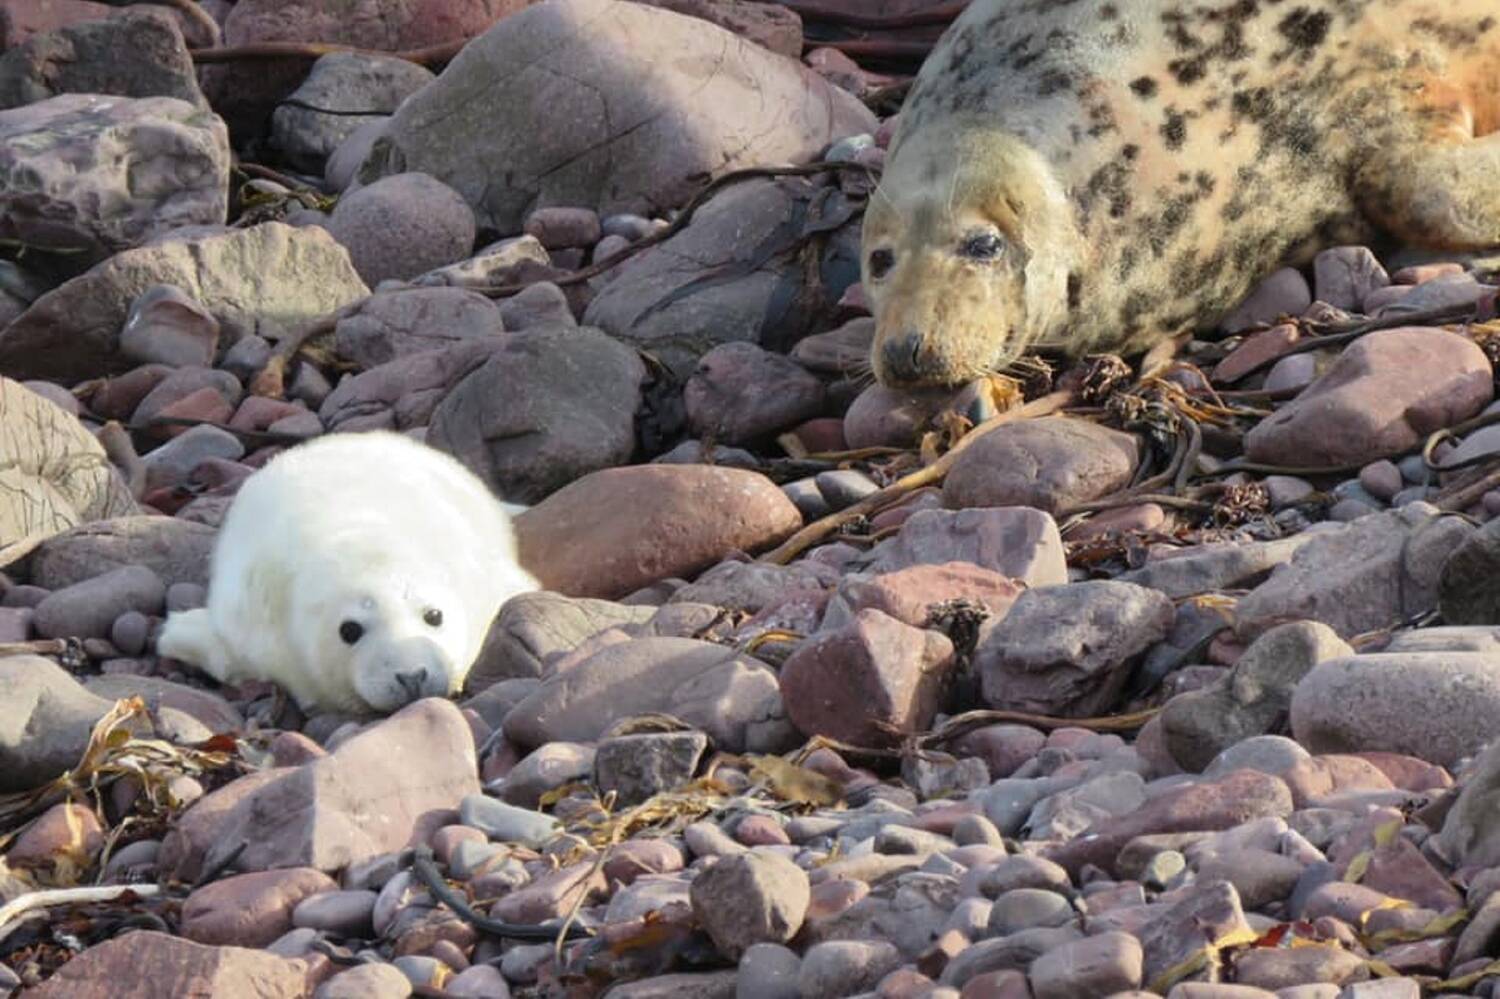 A white fluffy seal pup lies near its grey mother on a stony beach.